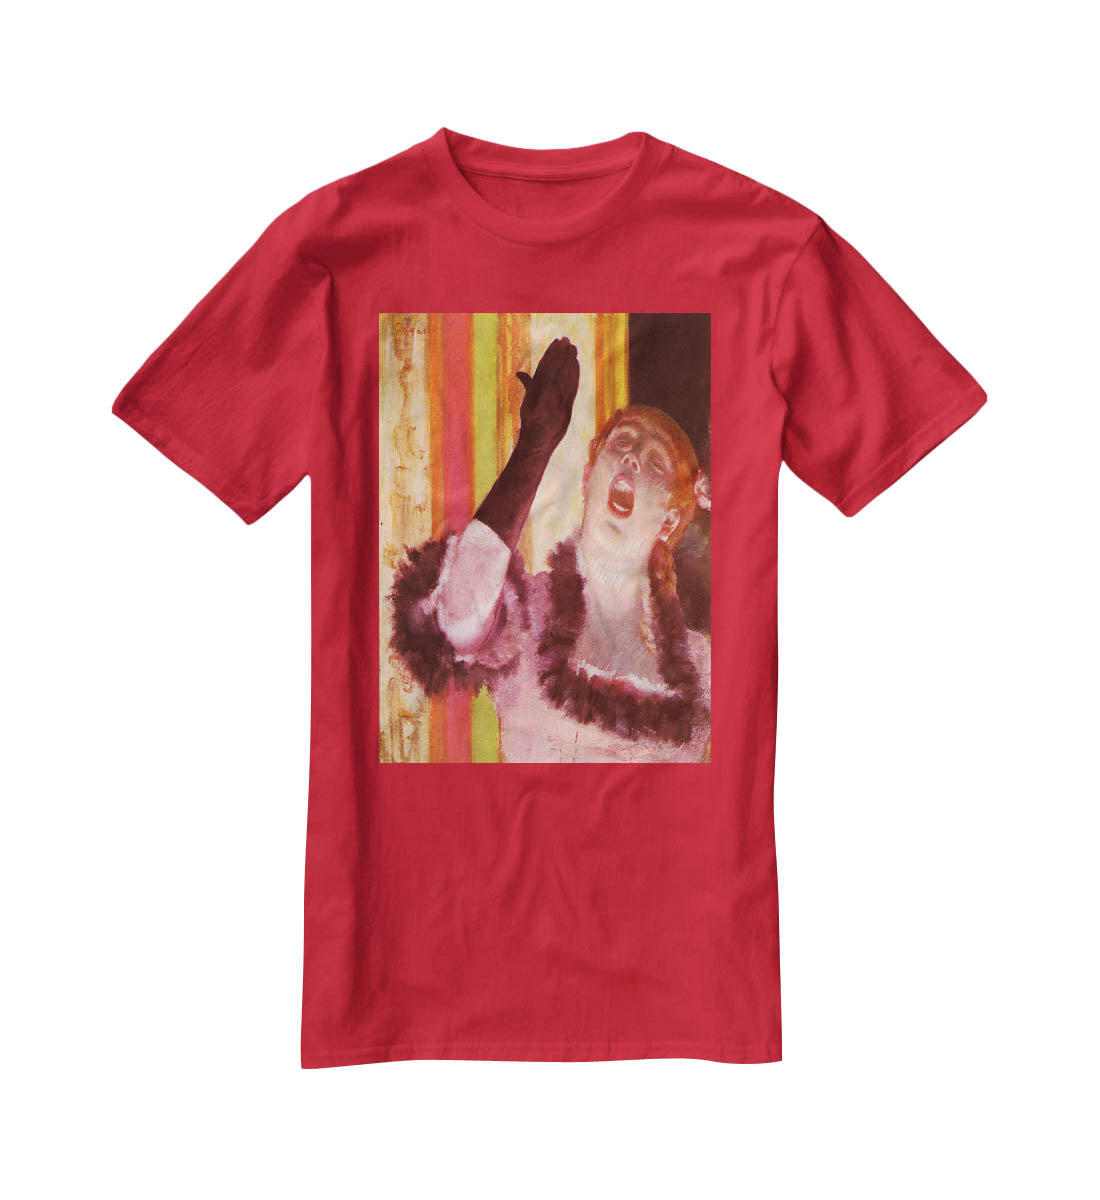 The singer with the glove by Degas T-Shirt - Canvas Art Rocks - 4